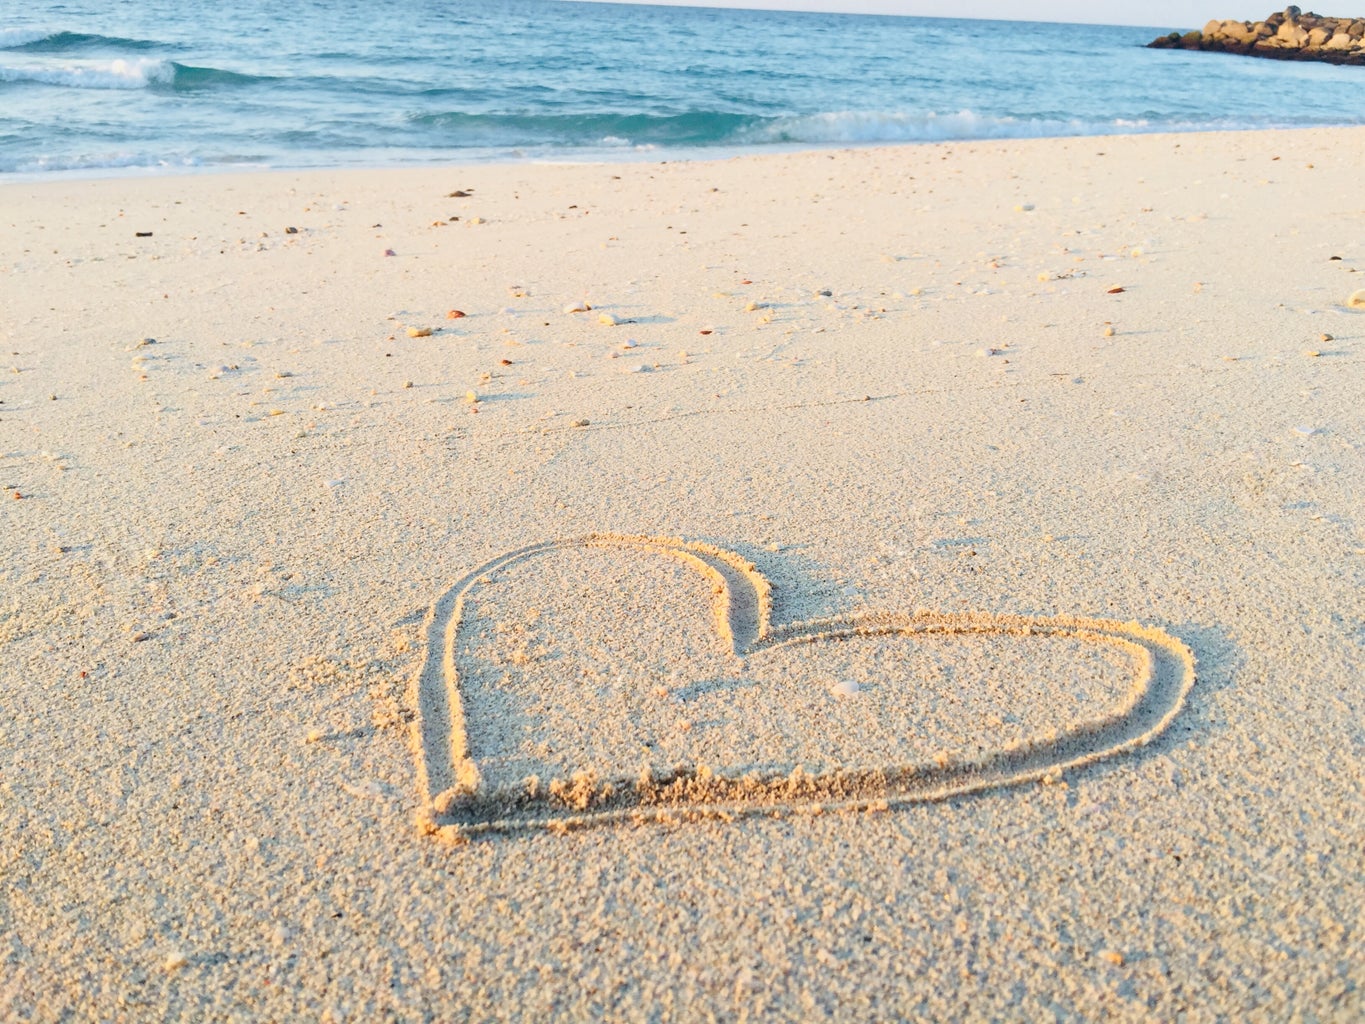 Heart drawn in the sand of the beach